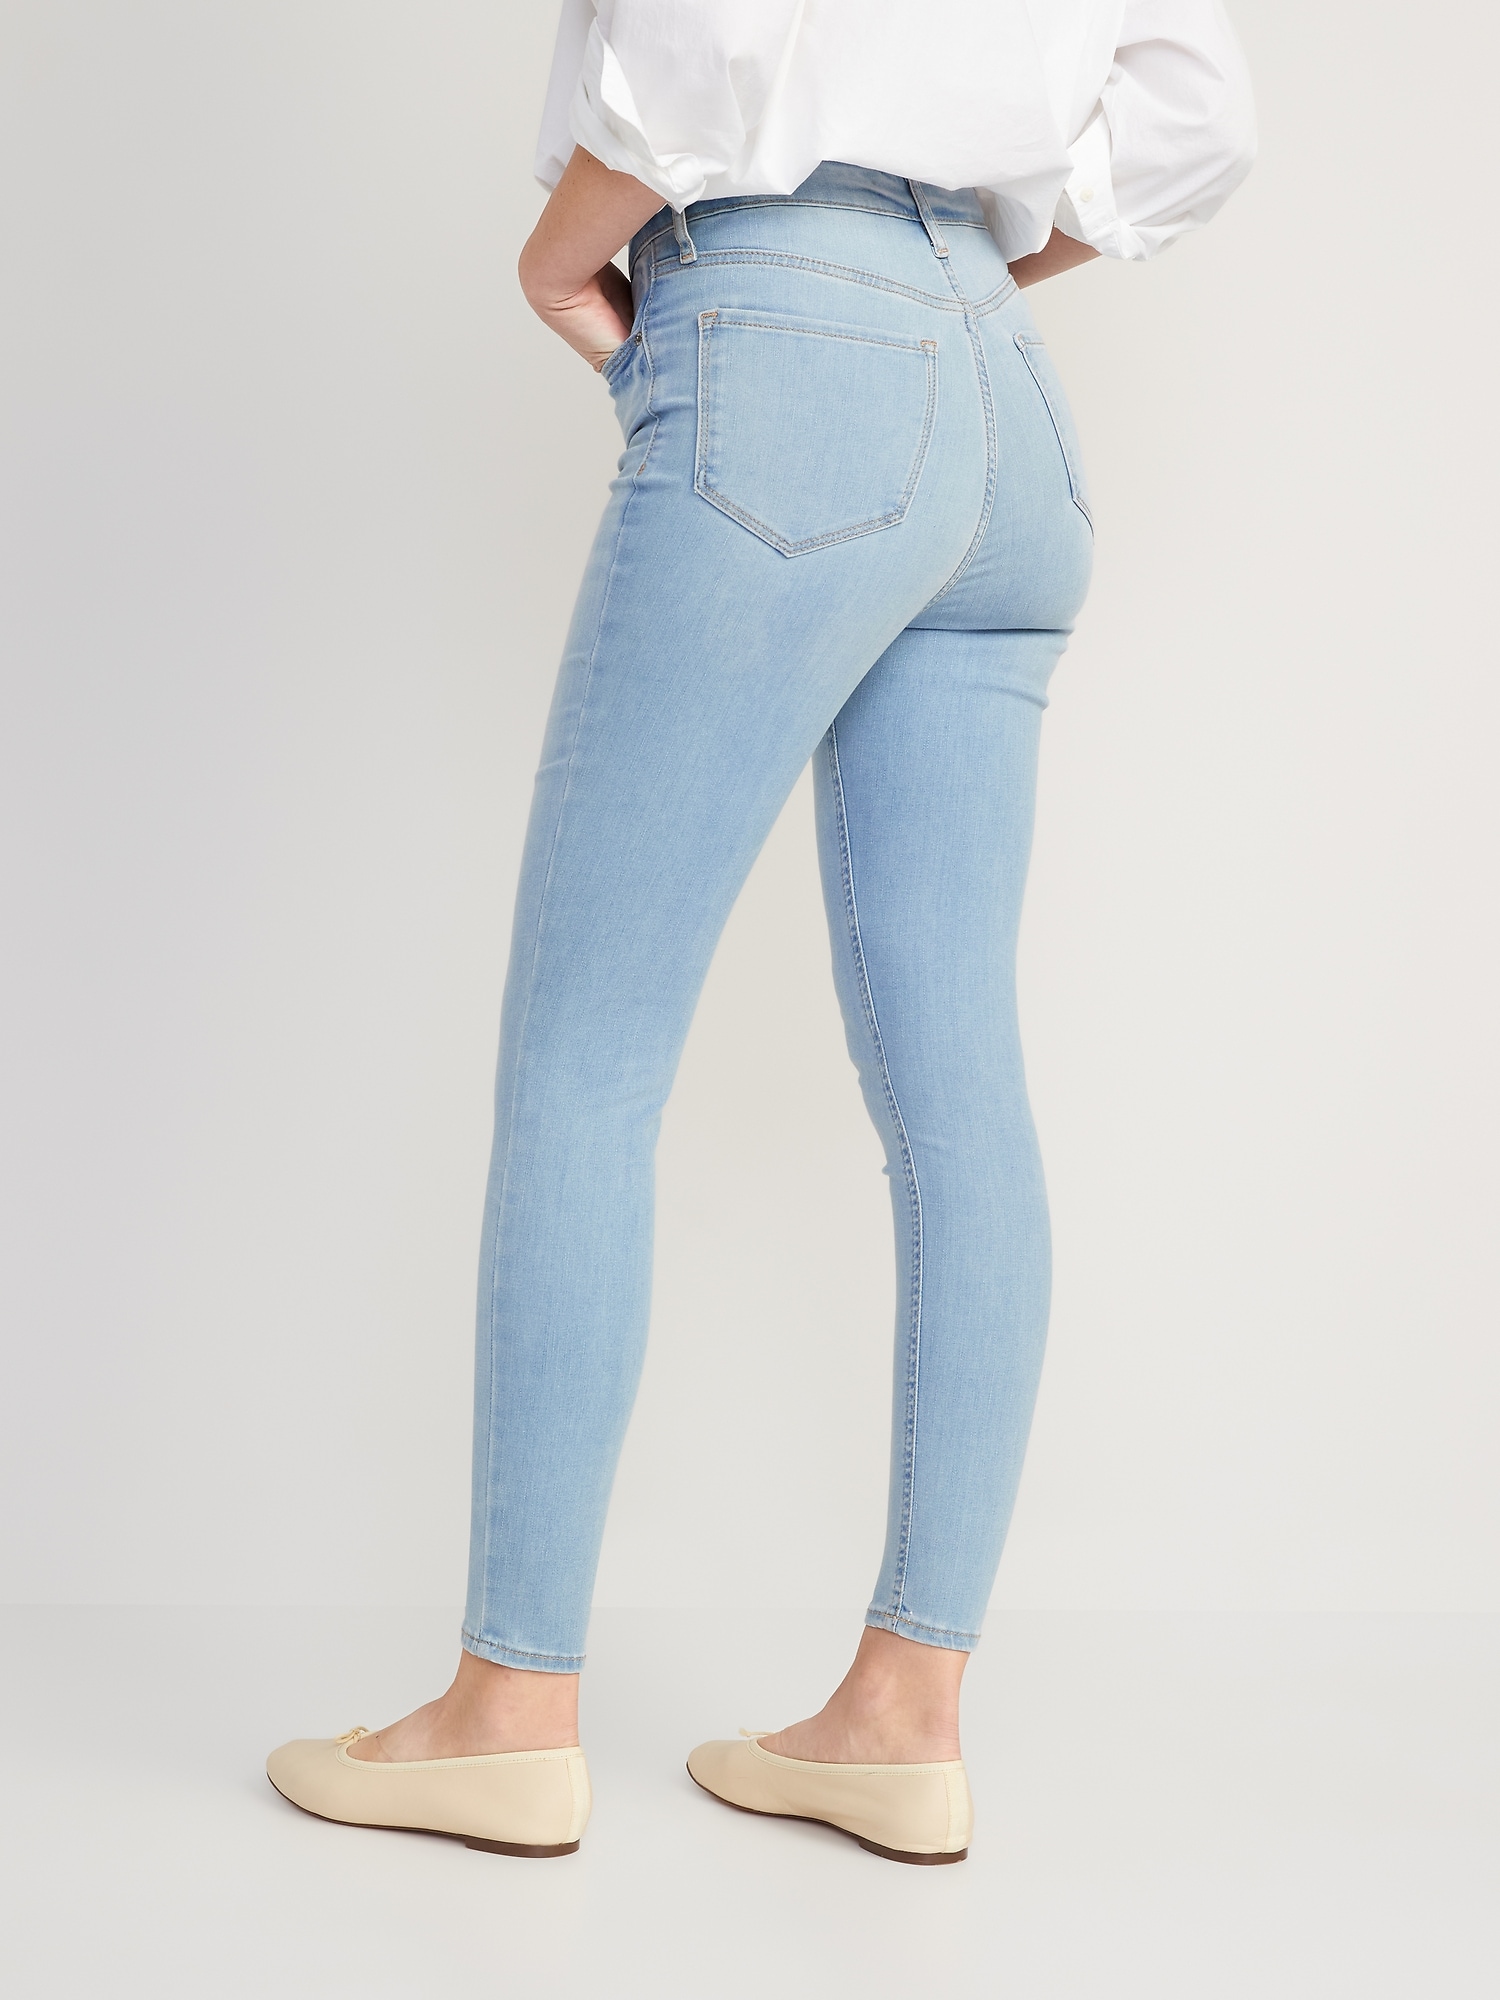 FitsYou 3-Sizes-in-1 Extra High-Waisted Jeans Navy Super-Skinny | Women for Old Rockstar